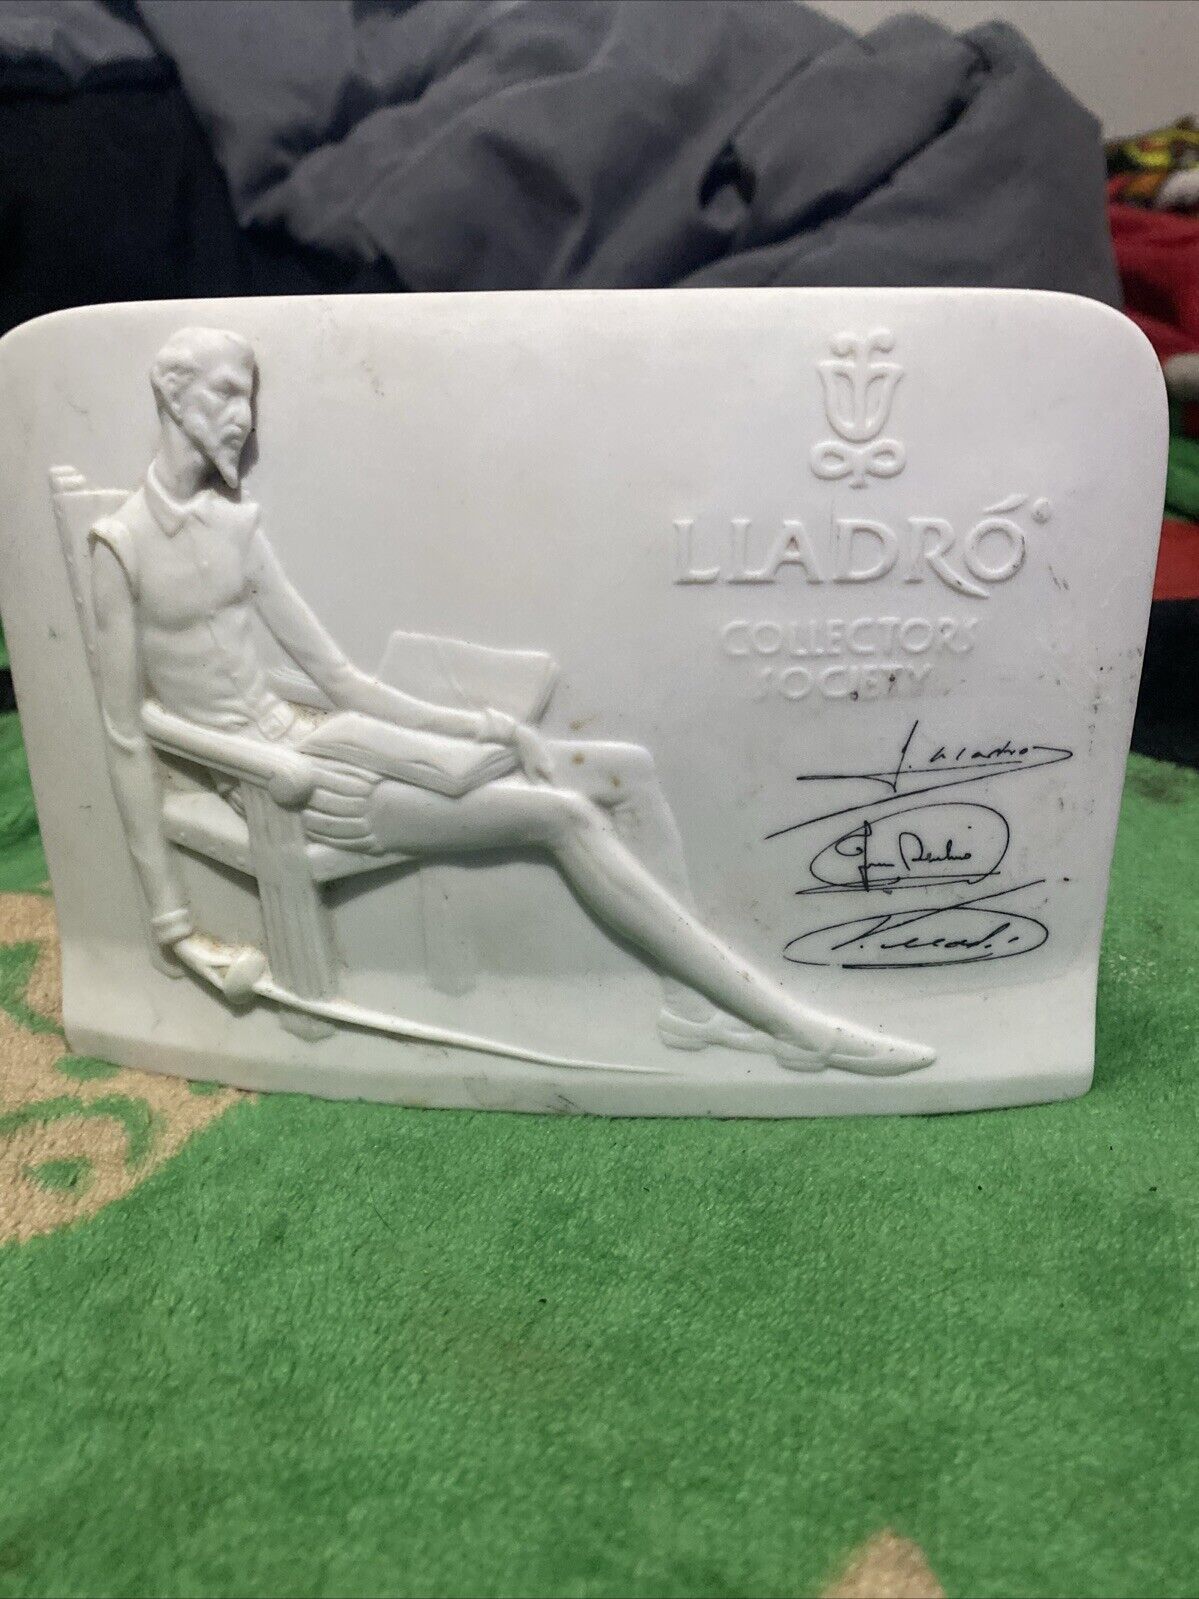 Lladro Collectors Society Don Quixote Porcelain Shell Plaque Signed (1987 Spain)